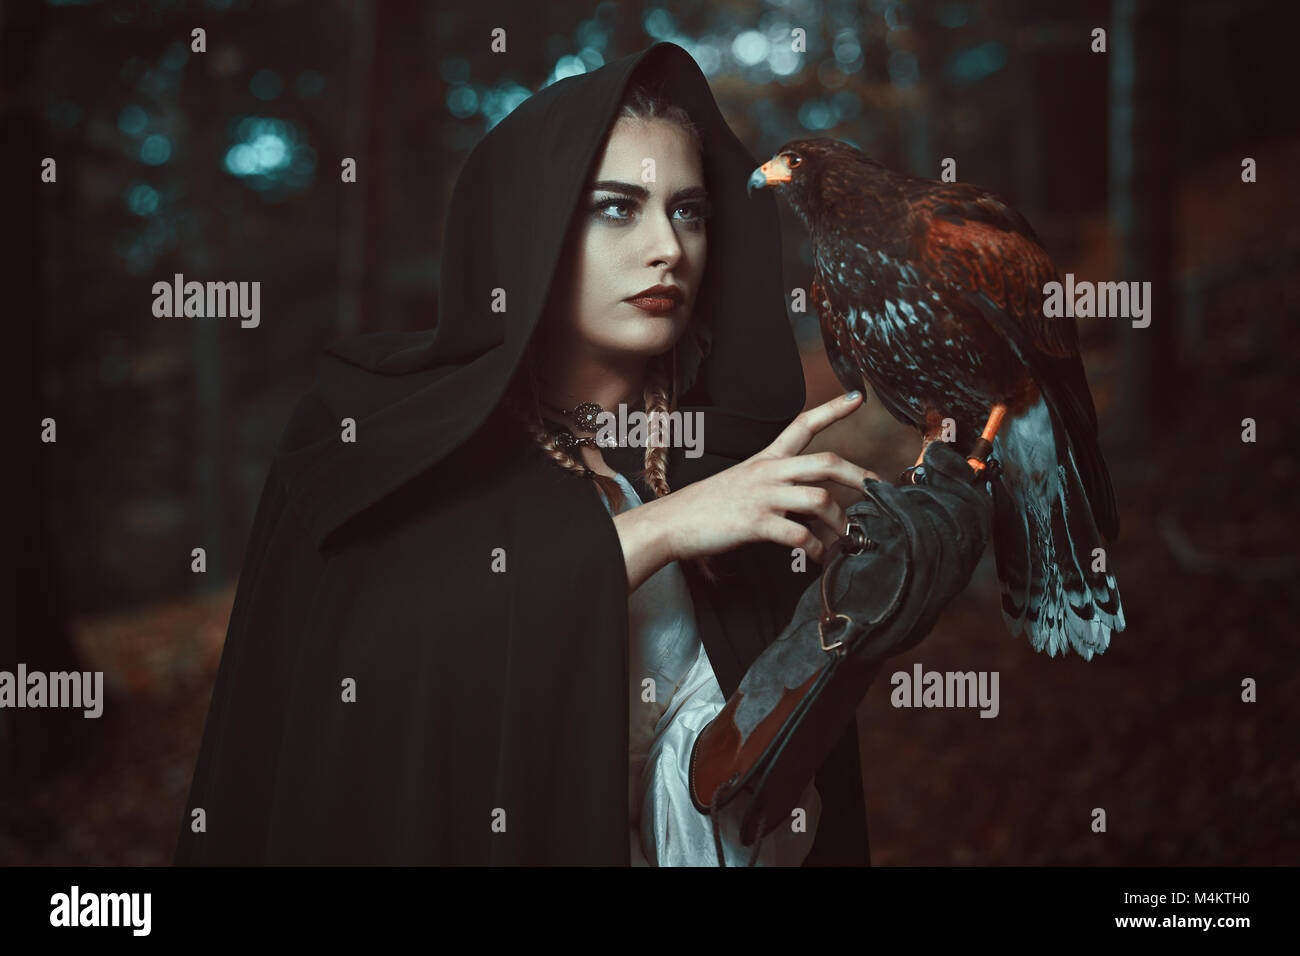 Magician woman with hawk familiar. Forest shot Stock Photo